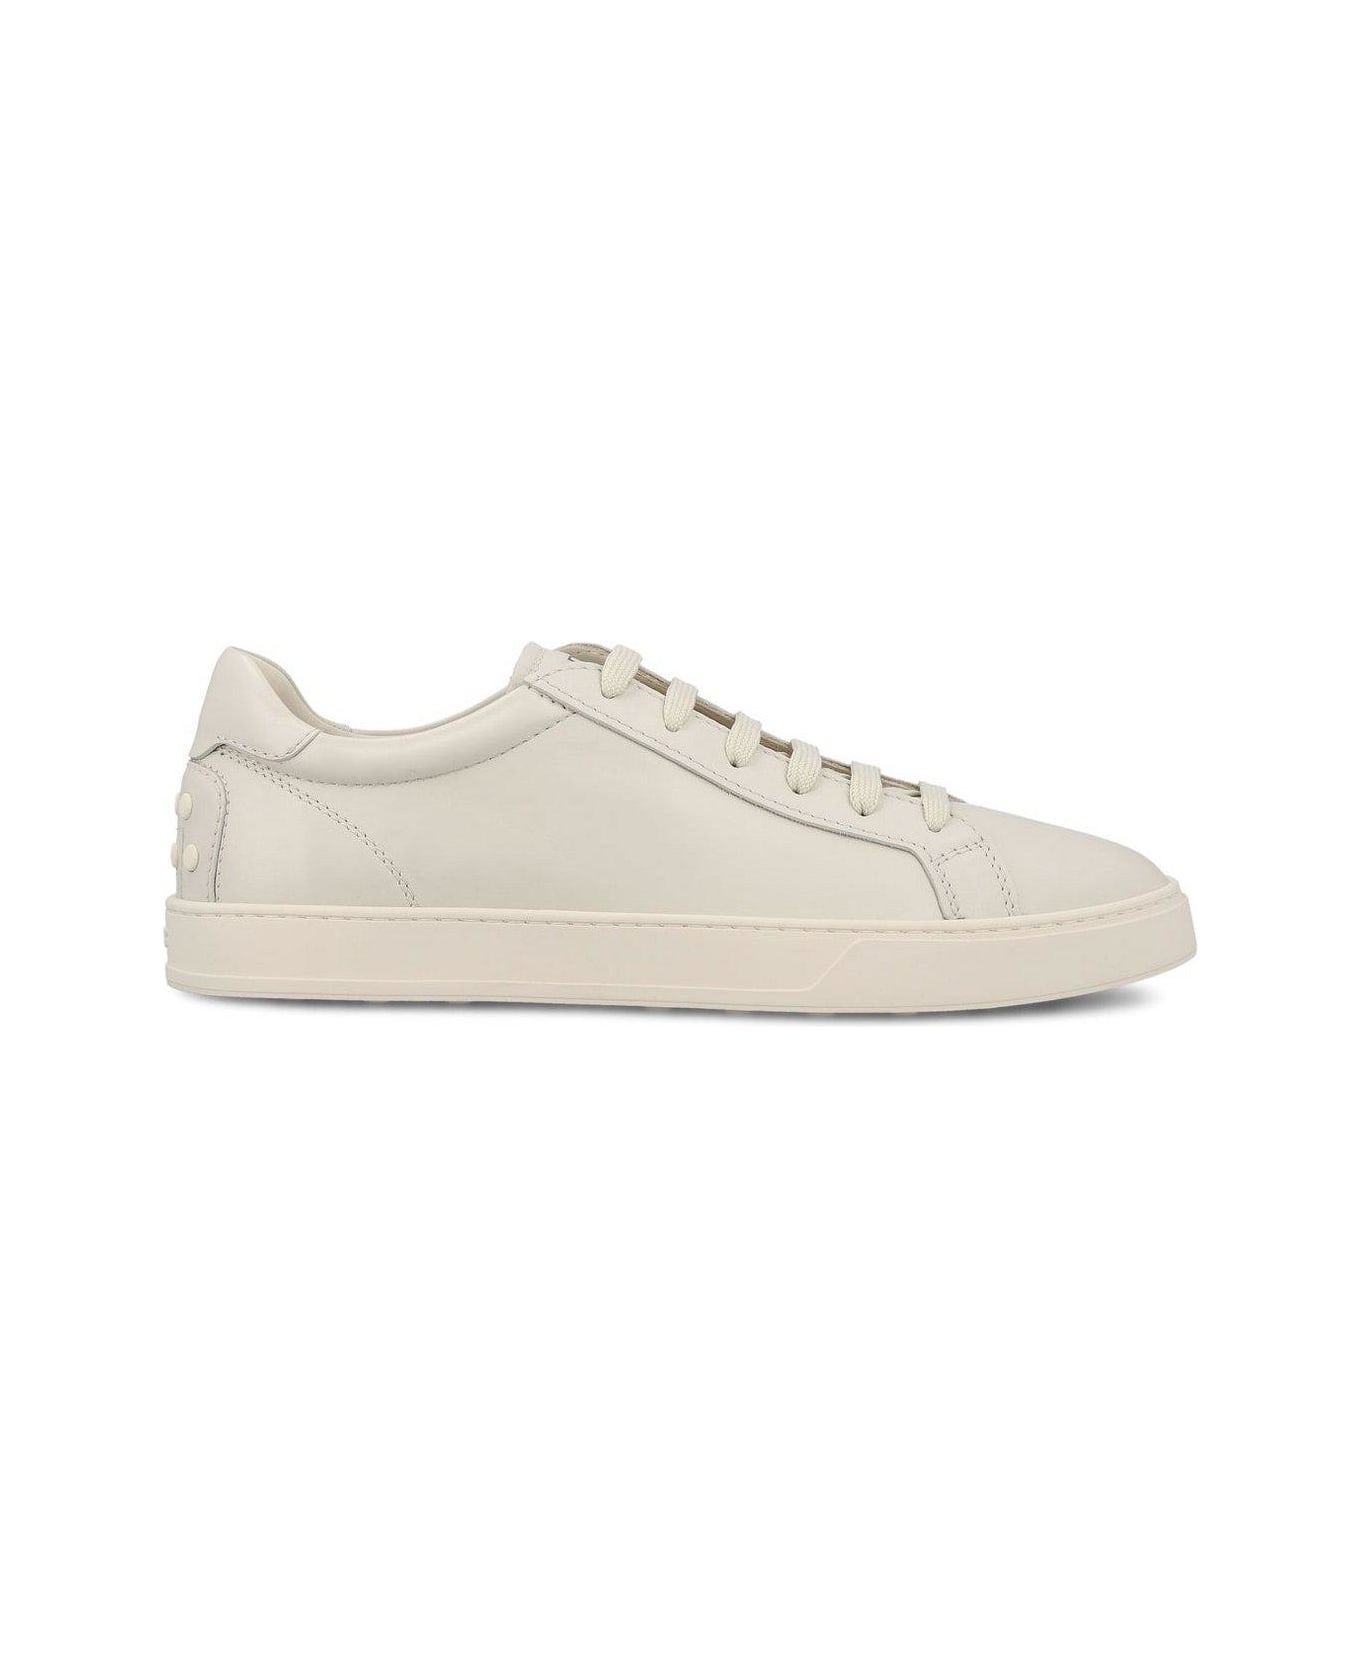 Tod's Round-toe Lace-up Sneakers - White